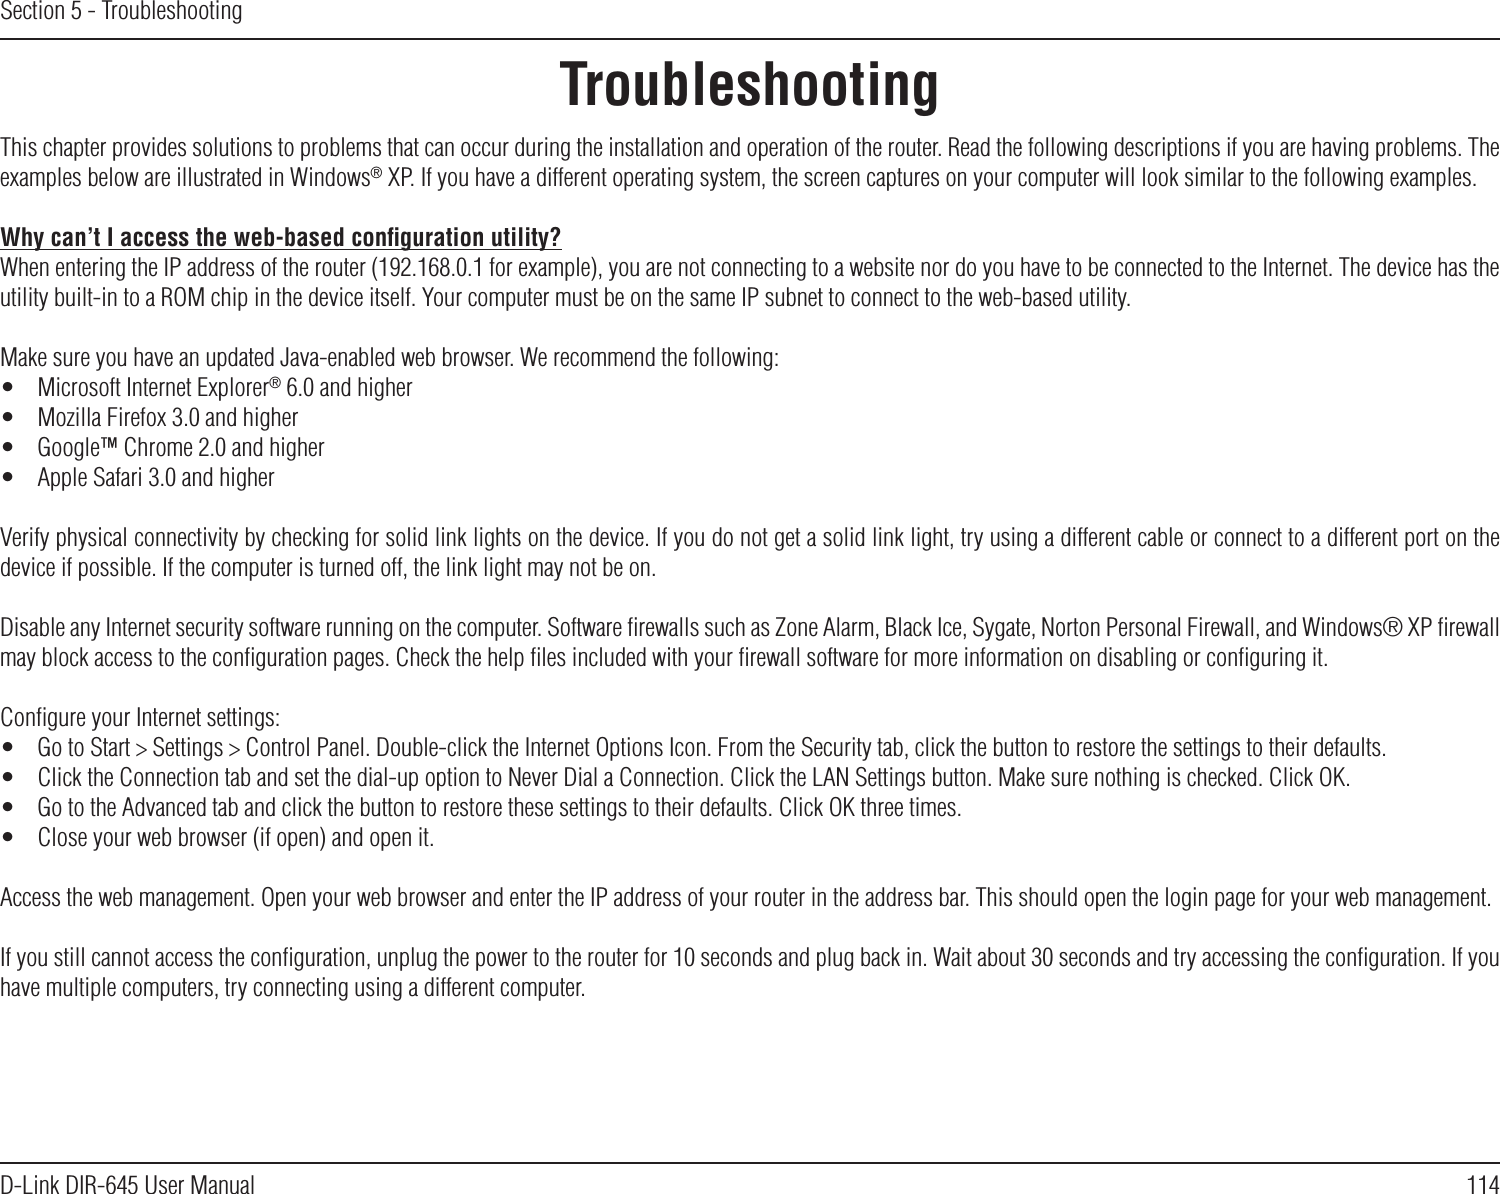 114D-Link DIR-645 User ManualSection 5 - TroubleshootingTroubleshootingThis chapter provides solutions to problems that can occur during the installation and operation of the router. Read the following descriptions if you are having problems. The examples below are illustrated in Windows® XP. If you have a different operating system, the screen captures on your computer will look similar to the following examples.Why can’t I access the web-based conﬁguration utility?When entering the IP address of the router (192.168.0.1 for example), you are not connecting to a website nor do you have to be connected to the Internet. The device has the utility built-in to a ROM chip in the device itself. Your computer must be on the same IP subnet to connect to the web-based utility.Make sure you have an updated Java-enabled web browser. We recommend the following:•  Microsoft Internet Explorer® 6.0 and higher•  Mozilla Firefox 3.0 and higher•  Google™ Chrome 2.0 and higher•  Apple Safari 3.0 and higherVerify physical connectivity by checking for solid link lights on the device. If you do not get a solid link light, try using a different cable or connect to a different port on the device if possible. If the computer is turned off, the link light may not be on.Disable any Internet security software running on the computer. Software ﬁrewalls such as Zone Alarm, Black Ice, Sygate, Norton Personal Firewall, and Windows® XP ﬁrewall may block access to the conﬁguration pages. Check the help ﬁles included with your ﬁrewall software for more information on disabling or conﬁguring it.Conﬁgure your Internet settings:•  Go to Start &gt; Settings &gt; Control Panel. Double-click the Internet Options Icon. From the Security tab, click the button to restore the settings to their defaults.•  Click the Connection tab and set the dial-up option to Never Dial a Connection. Click the LAN Settings button. Make sure nothing is checked. Click OK.•  Go to the Advanced tab and click the button to restore these settings to their defaults. Click OK three times.•  Close your web browser (if open) and open it.Access the web management. Open your web browser and enter the IP address of your router in the address bar. This should open the login page for your web management.If you still cannot access the conﬁguration, unplug the power to the router for 10 seconds and plug back in. Wait about 30 seconds and try accessing the conﬁguration. If you have multiple computers, try connecting using a different computer.